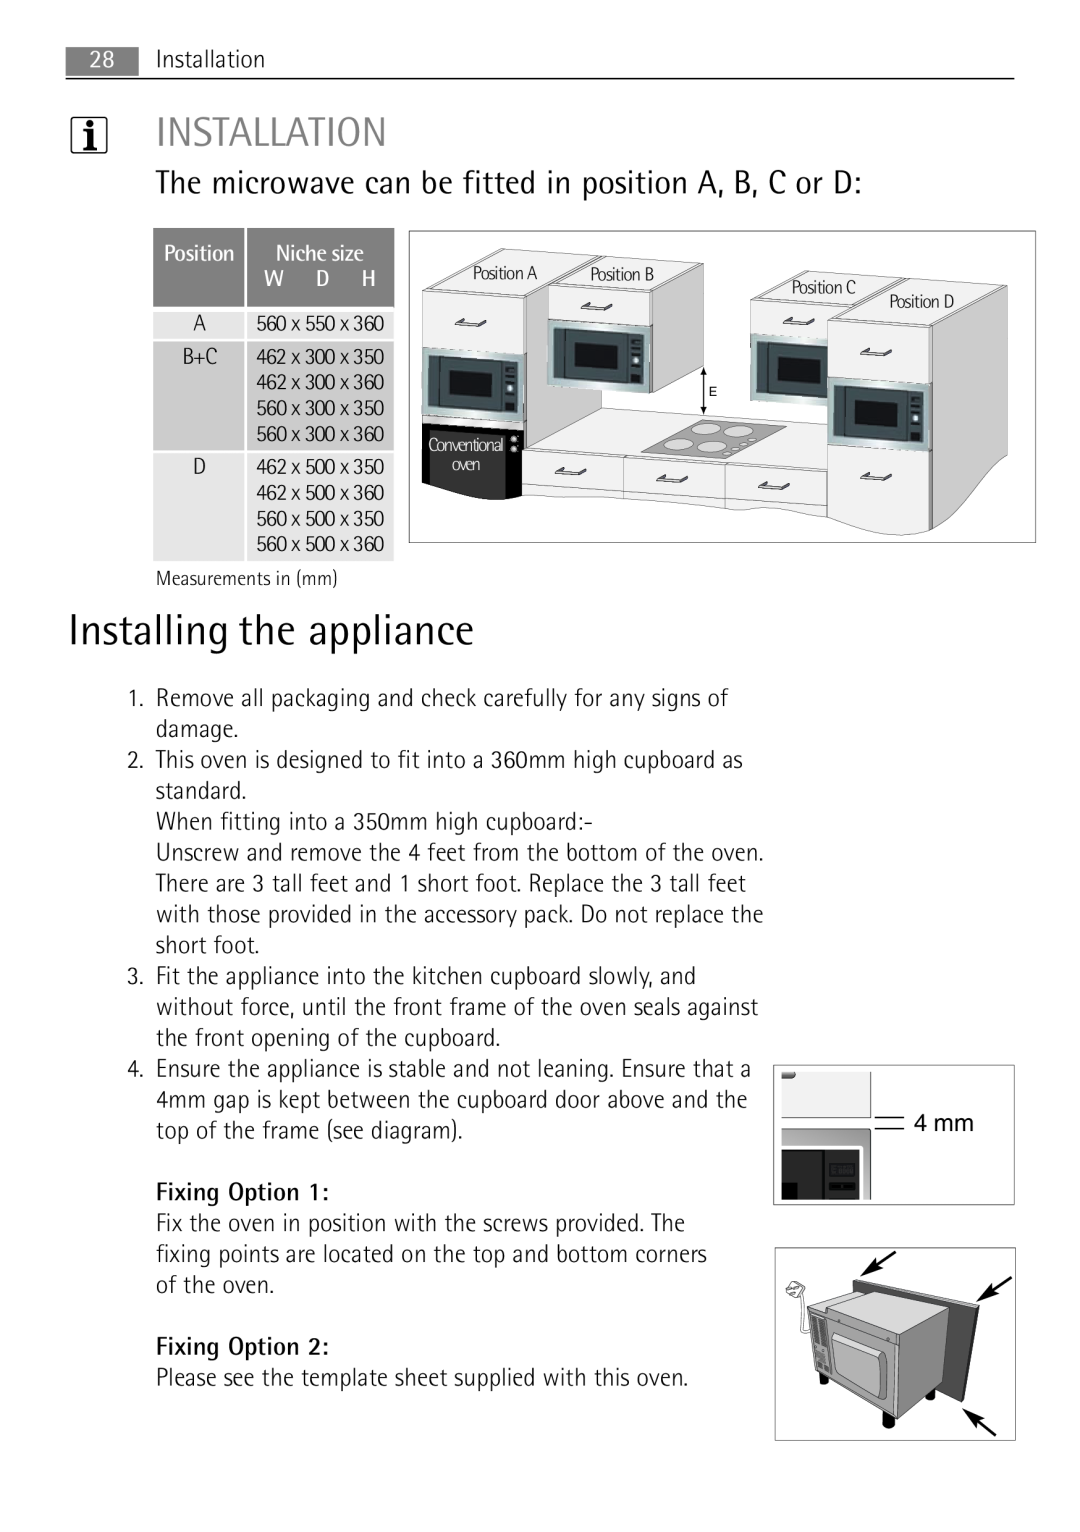 AEG MC1763E Installing the appliance, Installation, The microwave can be fitted in position A, B, C or D, Fixing Option 